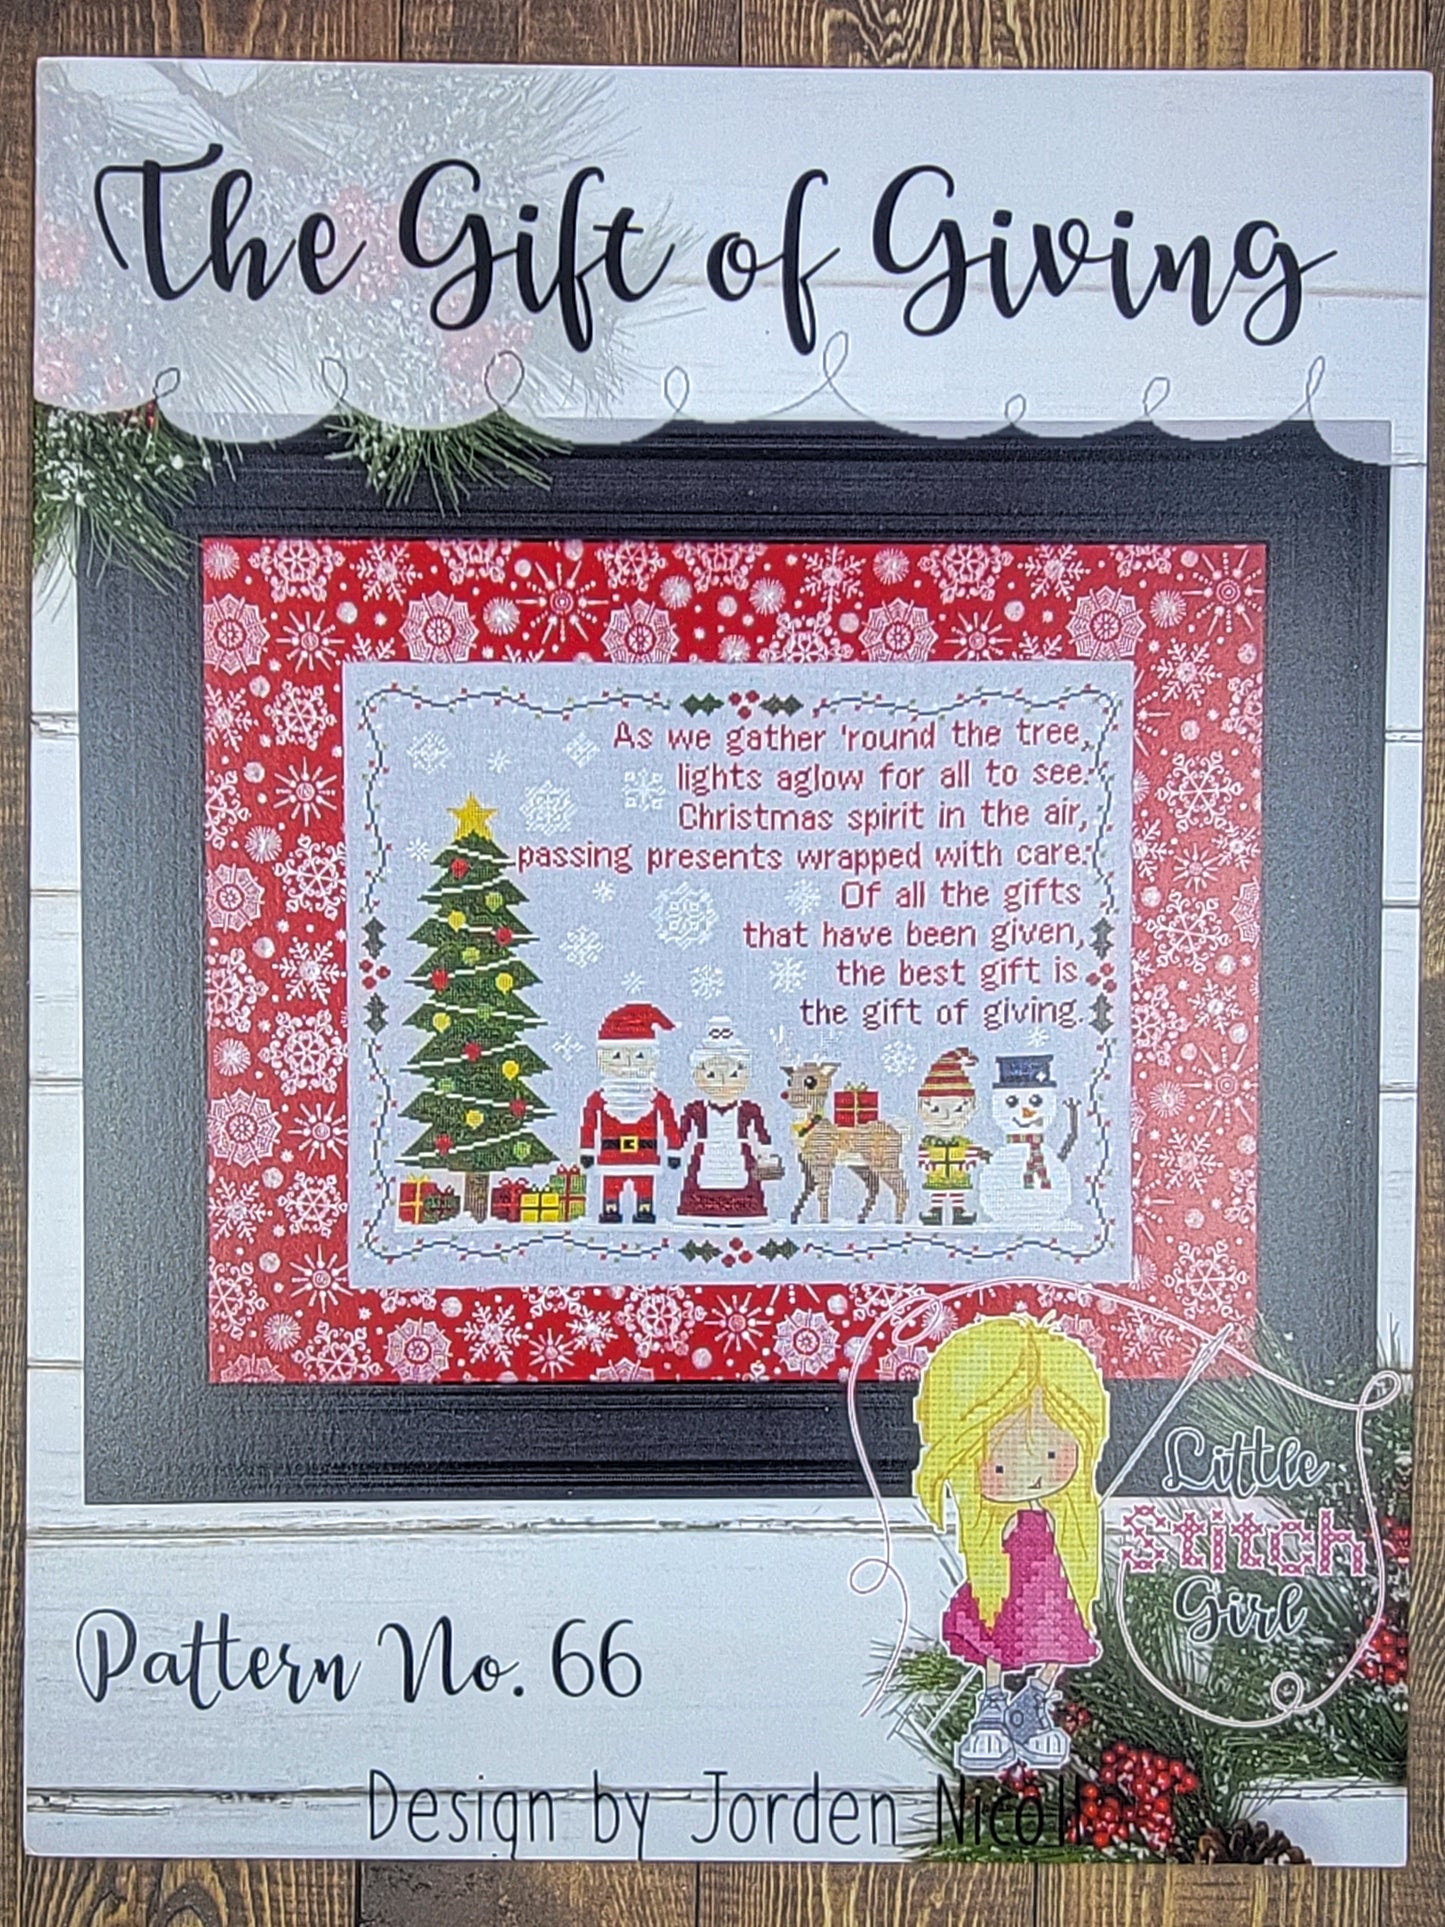 The Gift of Giving by Little Stitch Girl